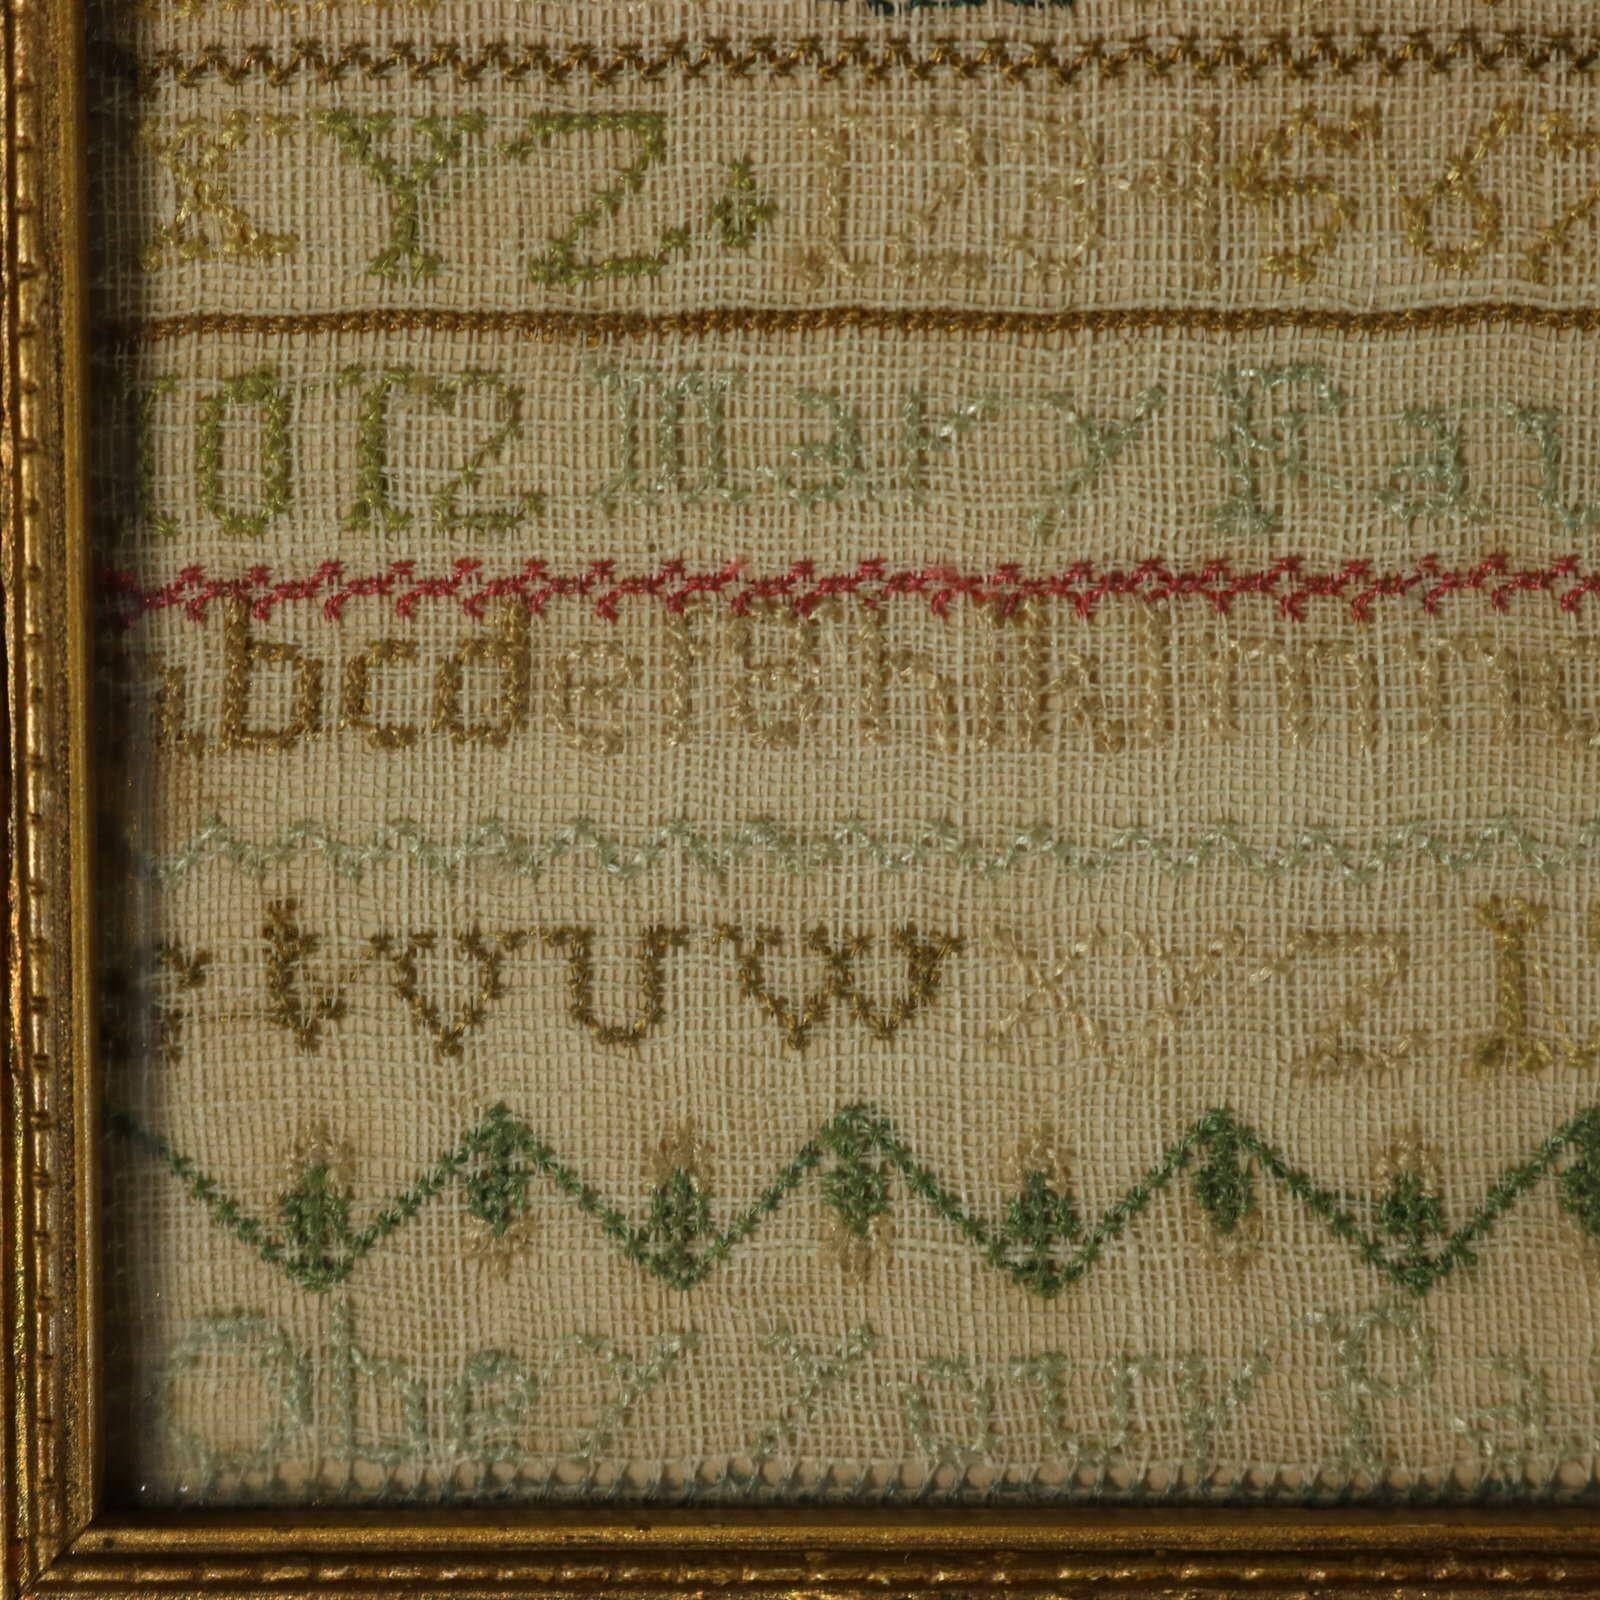 Georgian Miniature Sampler, 1791, by Mary Faulke. The sampler is worked in silk on linen ground, in cross stitch throughout. Simple line border and divider lines in a number of patterns. Colours green, gold, pink, red and brown. Alphabets A-Z in